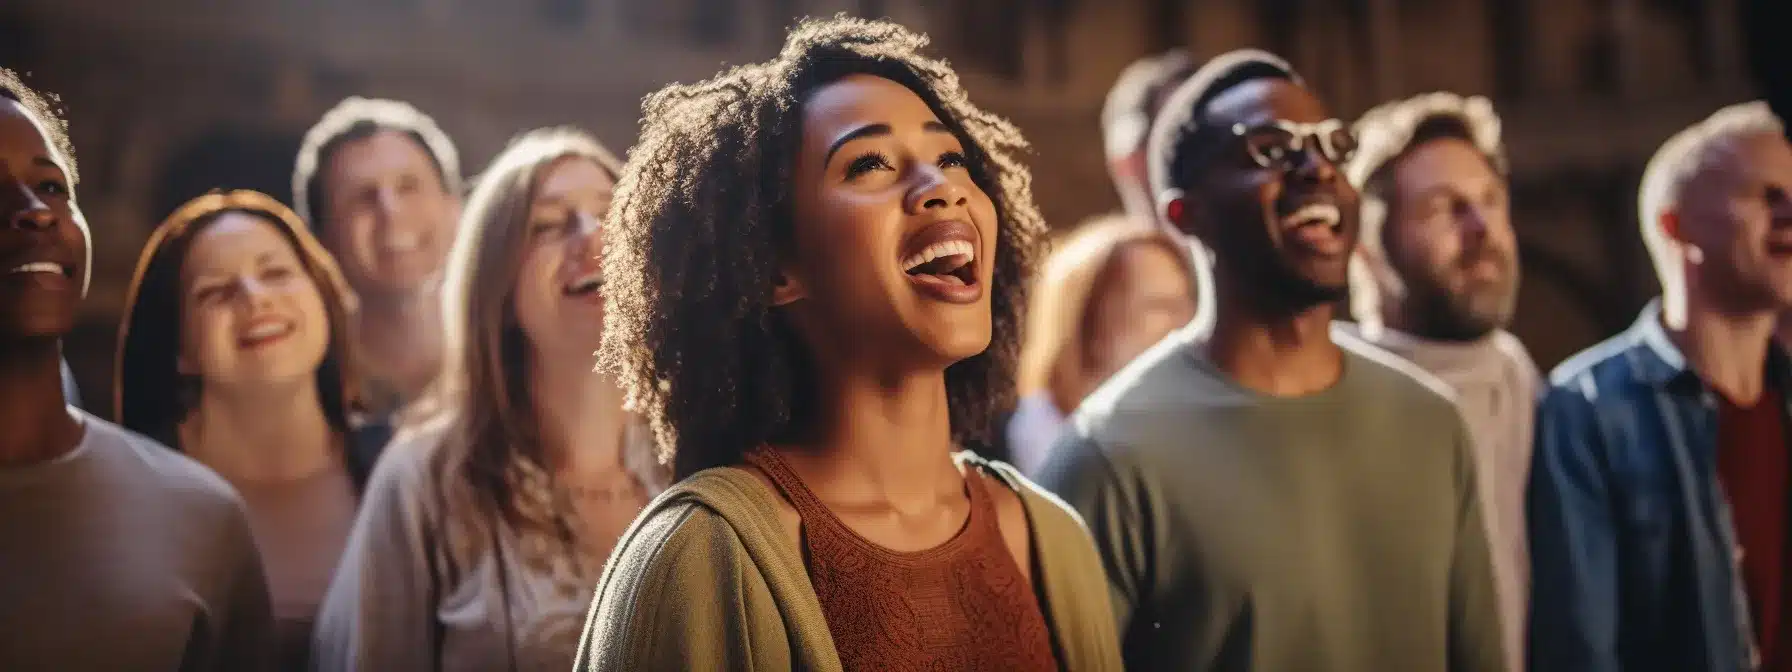 a group of diverse individuals standing together, singing passionately in a community choir, radiating joy and forming deep connections.